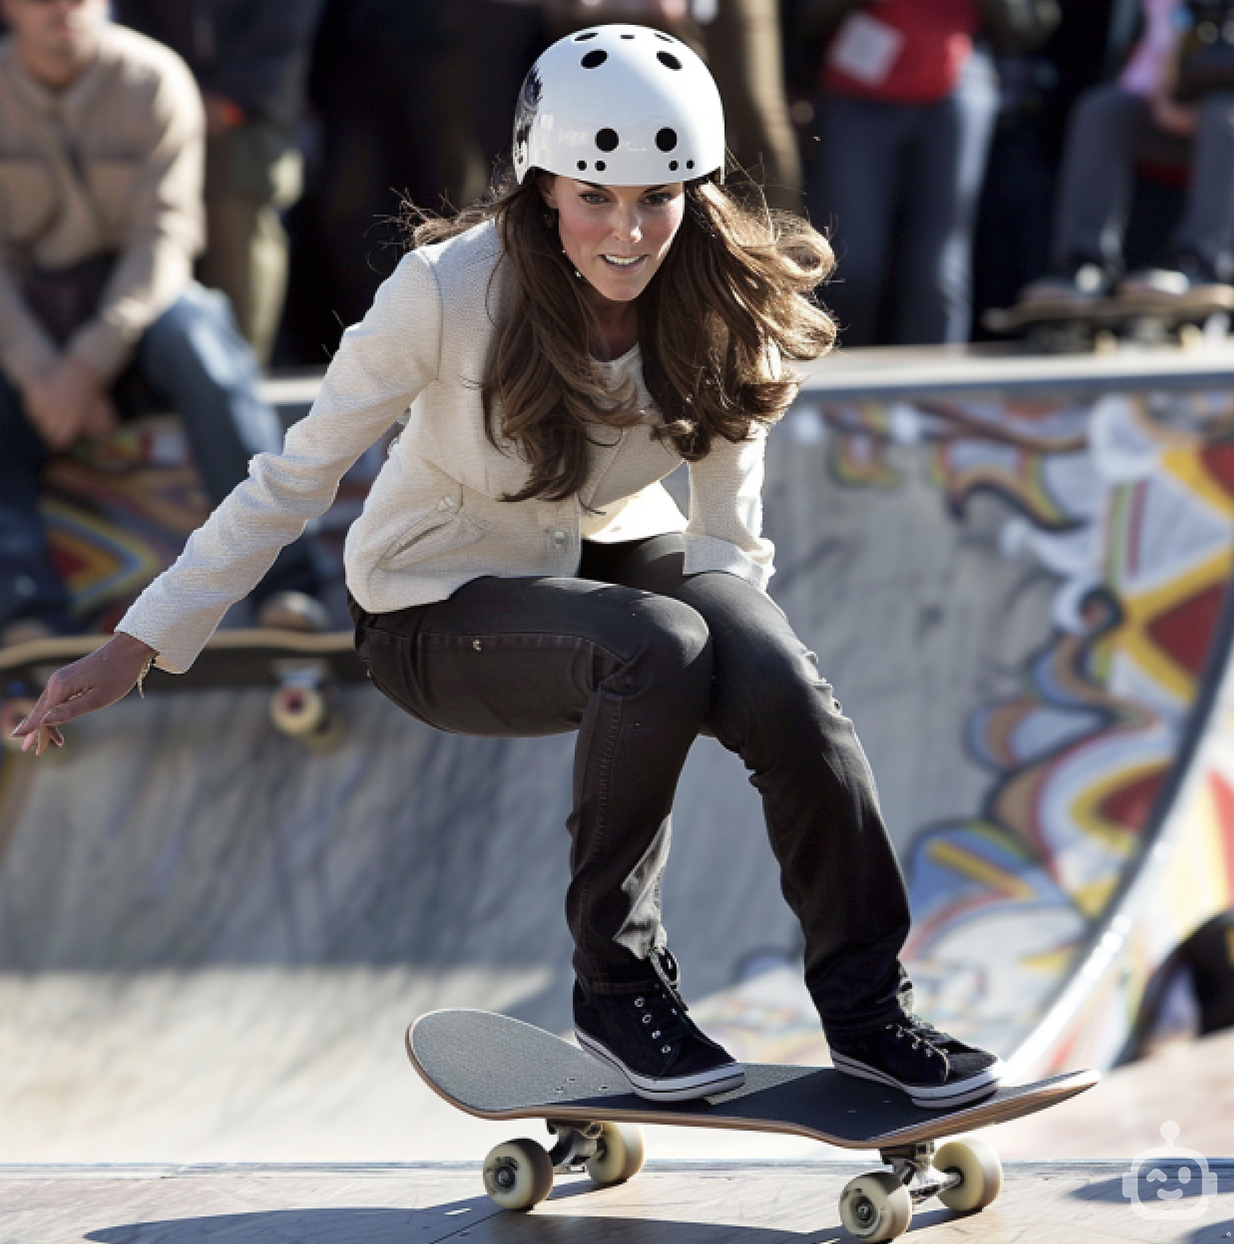 Woman skateboarding at an event, wearing casual sweater and pants with a helmet for safety